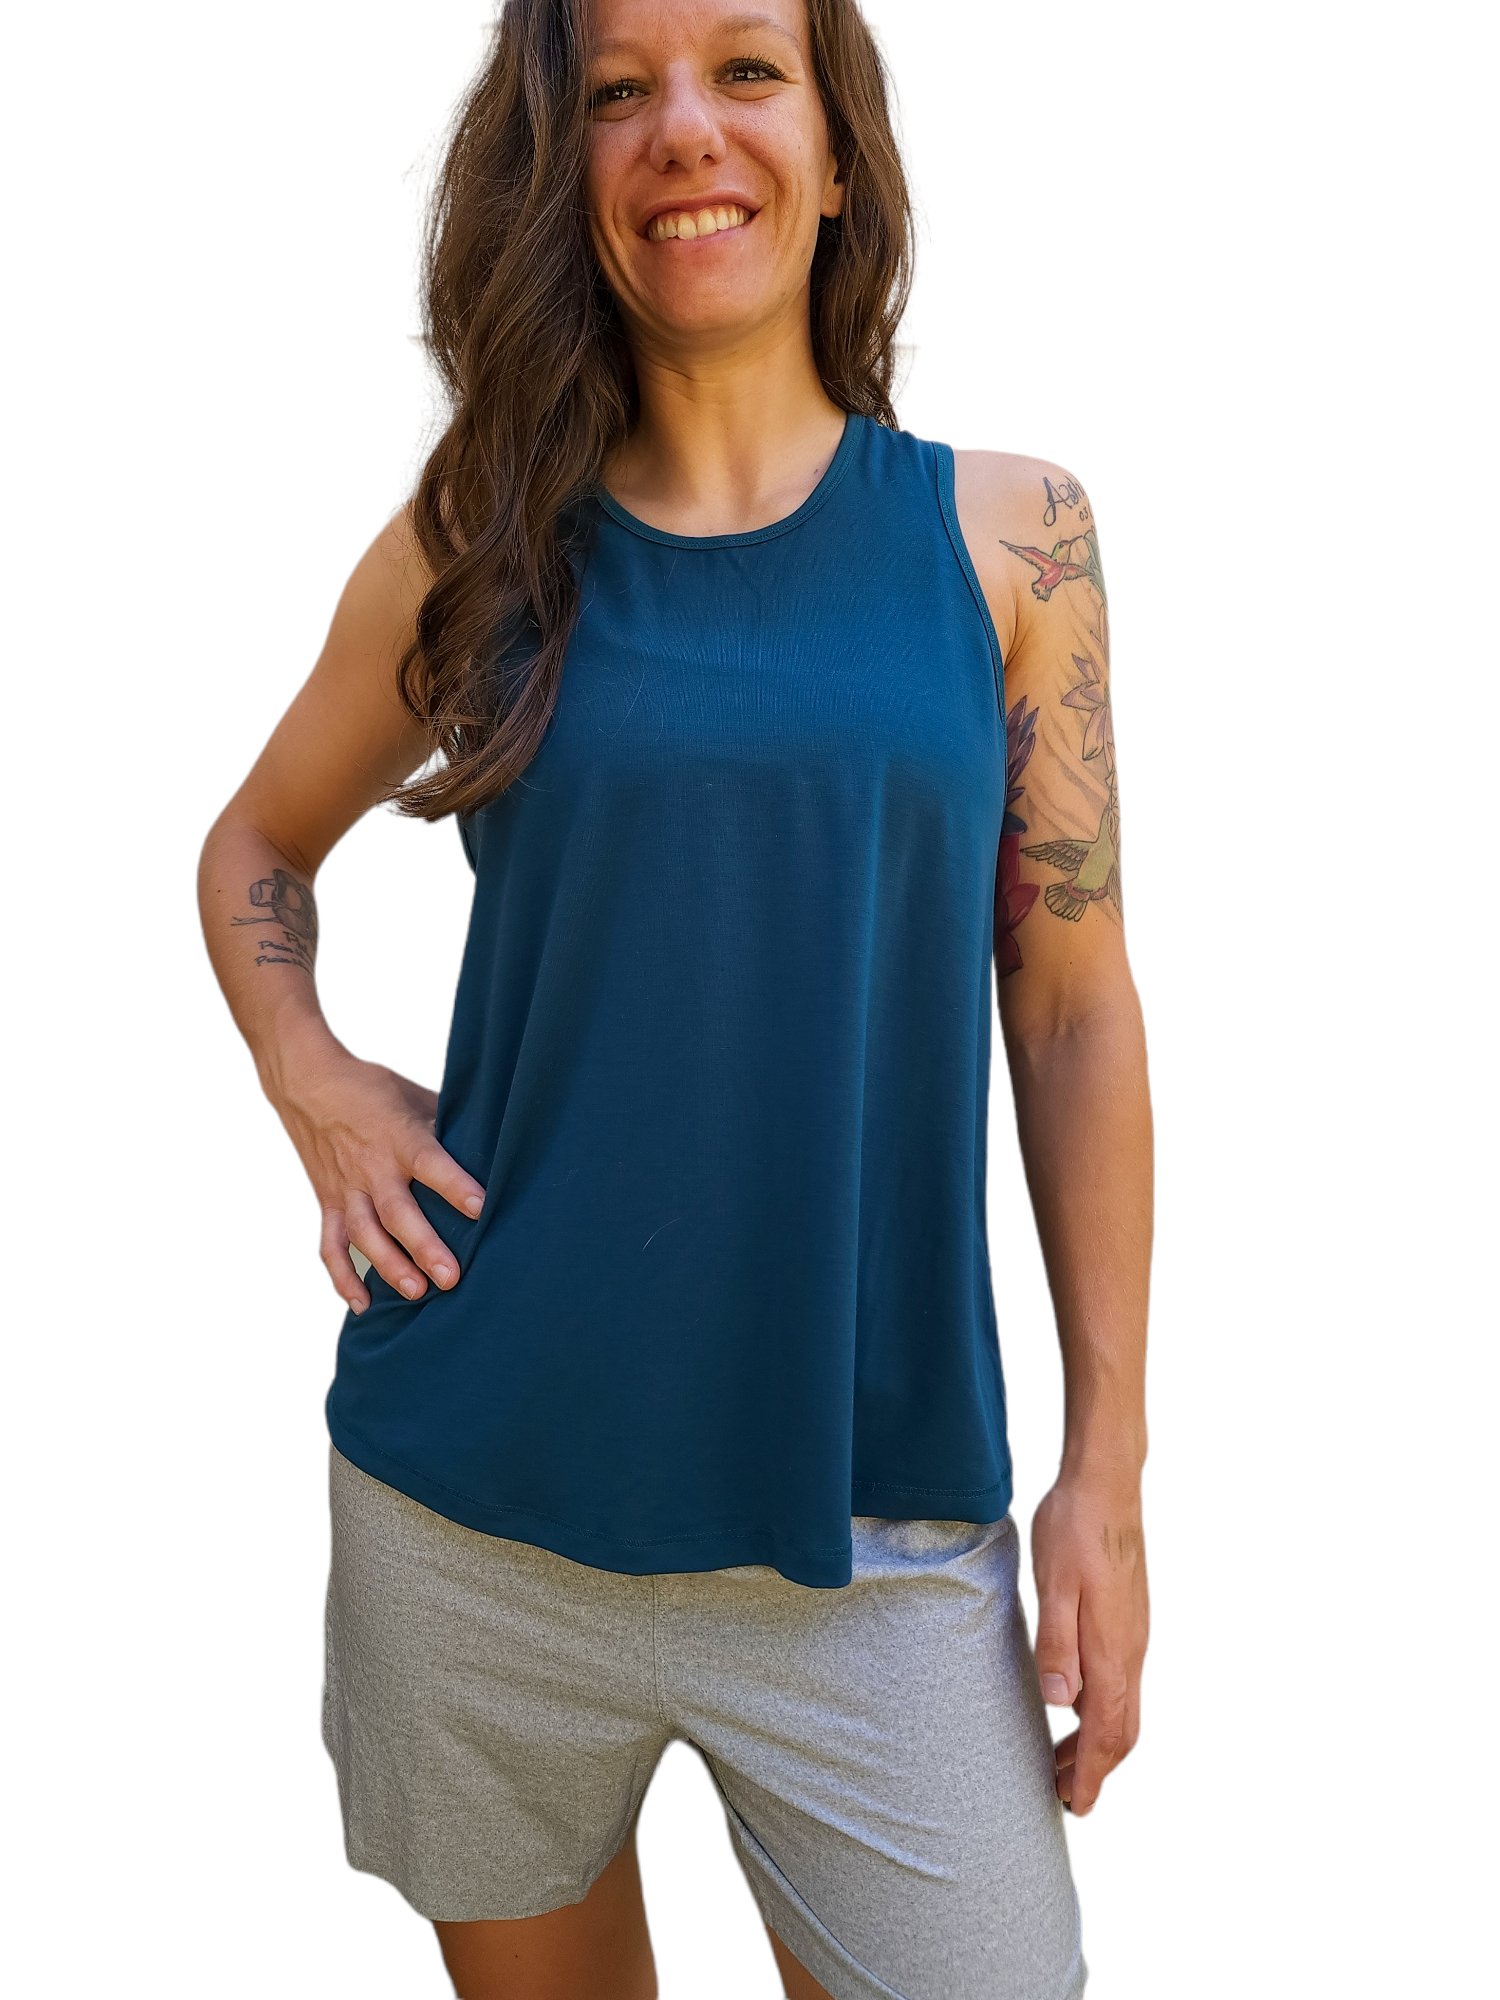 All In Motion Teal Tank Top